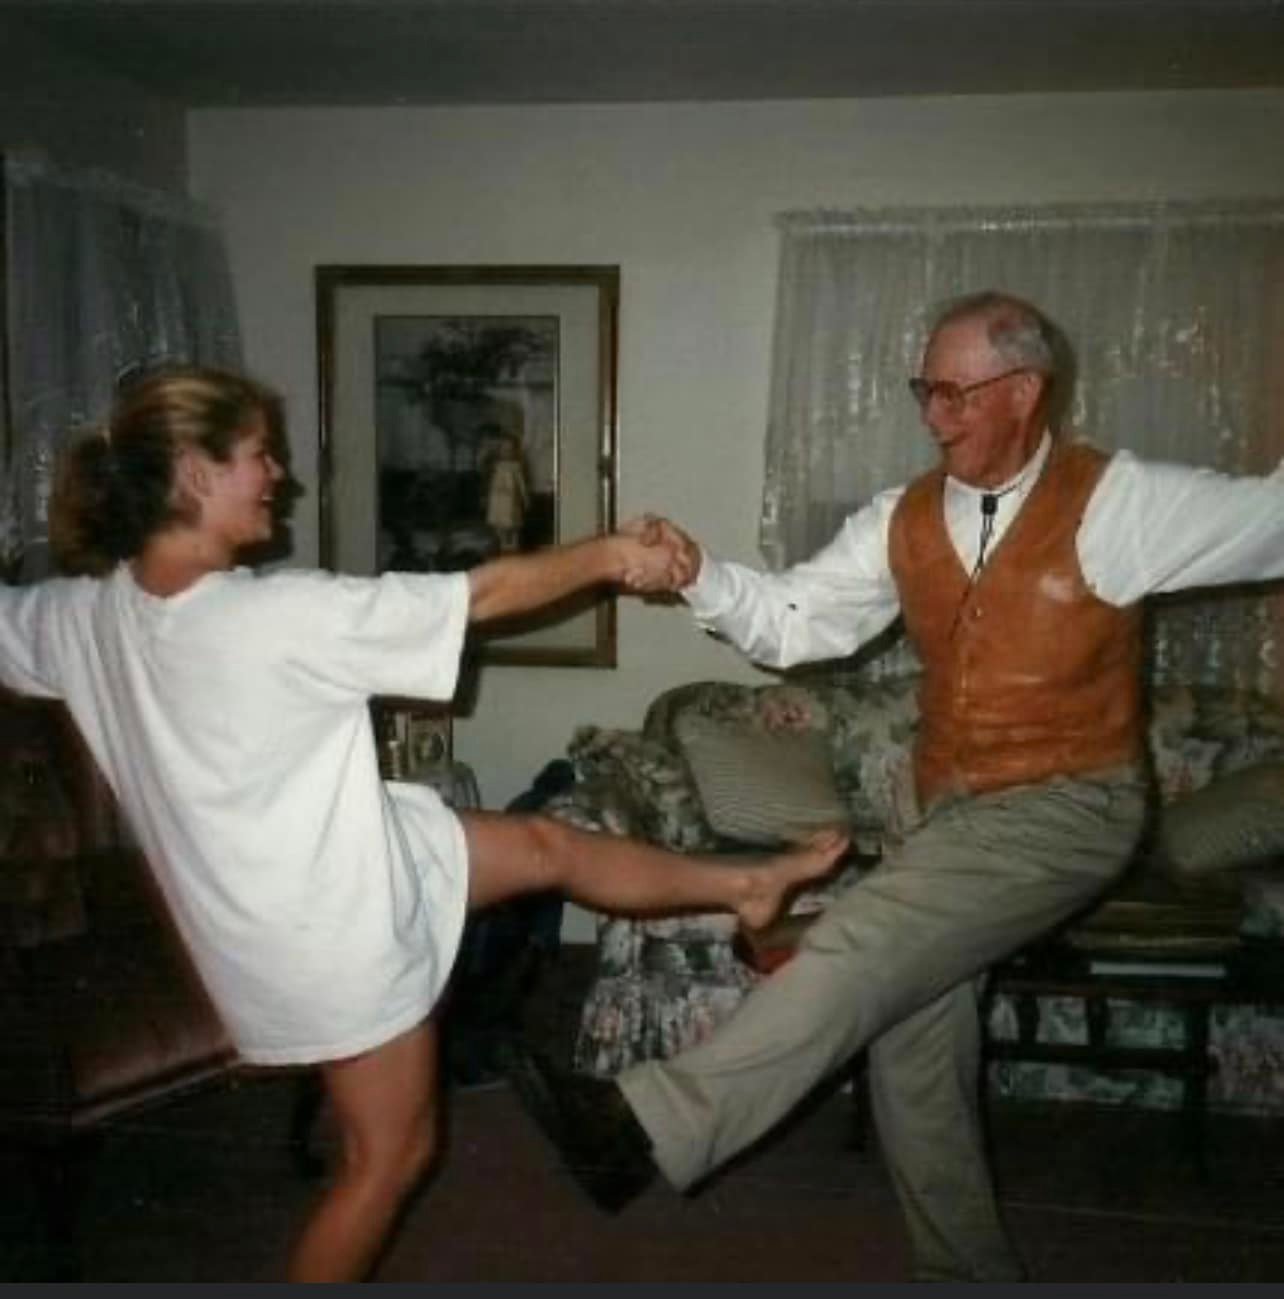 Mary Jo, or “Joey” lived with her grandparents during her final years of high school. She shared fond memories of her grandfather watching her cheer, working cattle, and waiting  patiently in the car for Joey on Sunday mornings before church. The two are pictured here  dancing in the Macdonnell’s living room. 